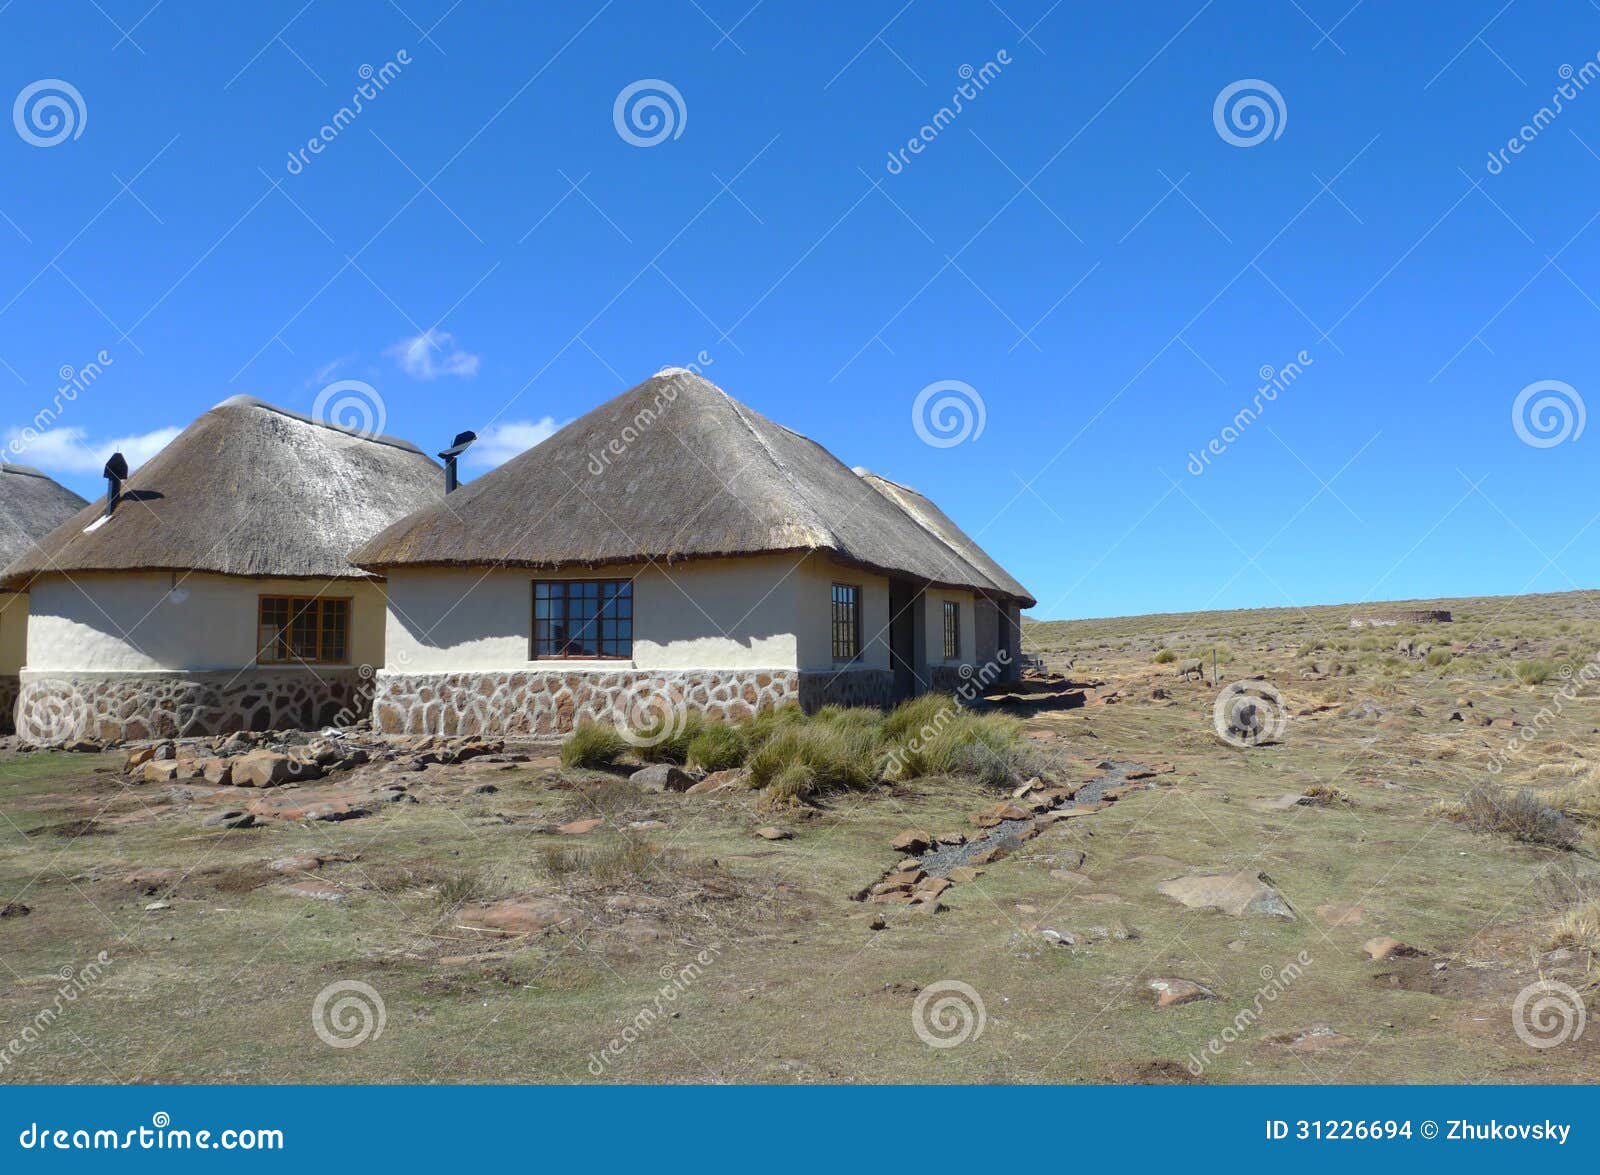 Traditional Style Of Housing In Lesotho At Sani Pass At 